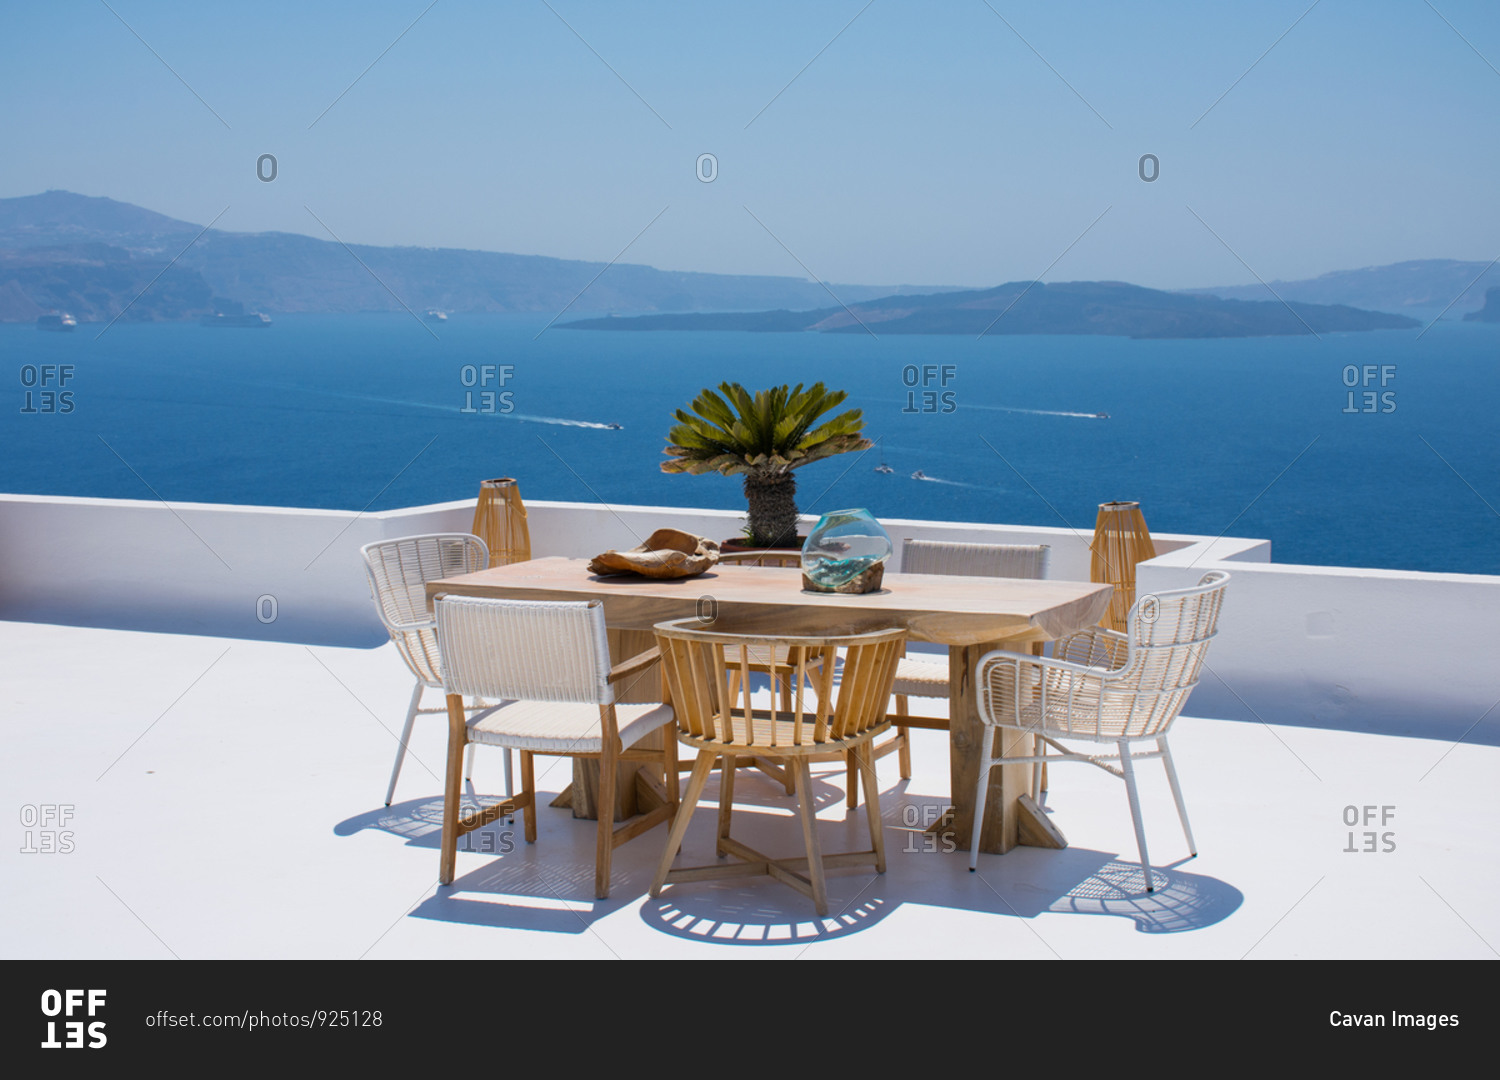 furniture composed by a table and some chairs on a white terrace of a house in Santorini Greece where you can enjoy meal while seeing a romantic seascape to the blue Aegean sea. Horizontal ph